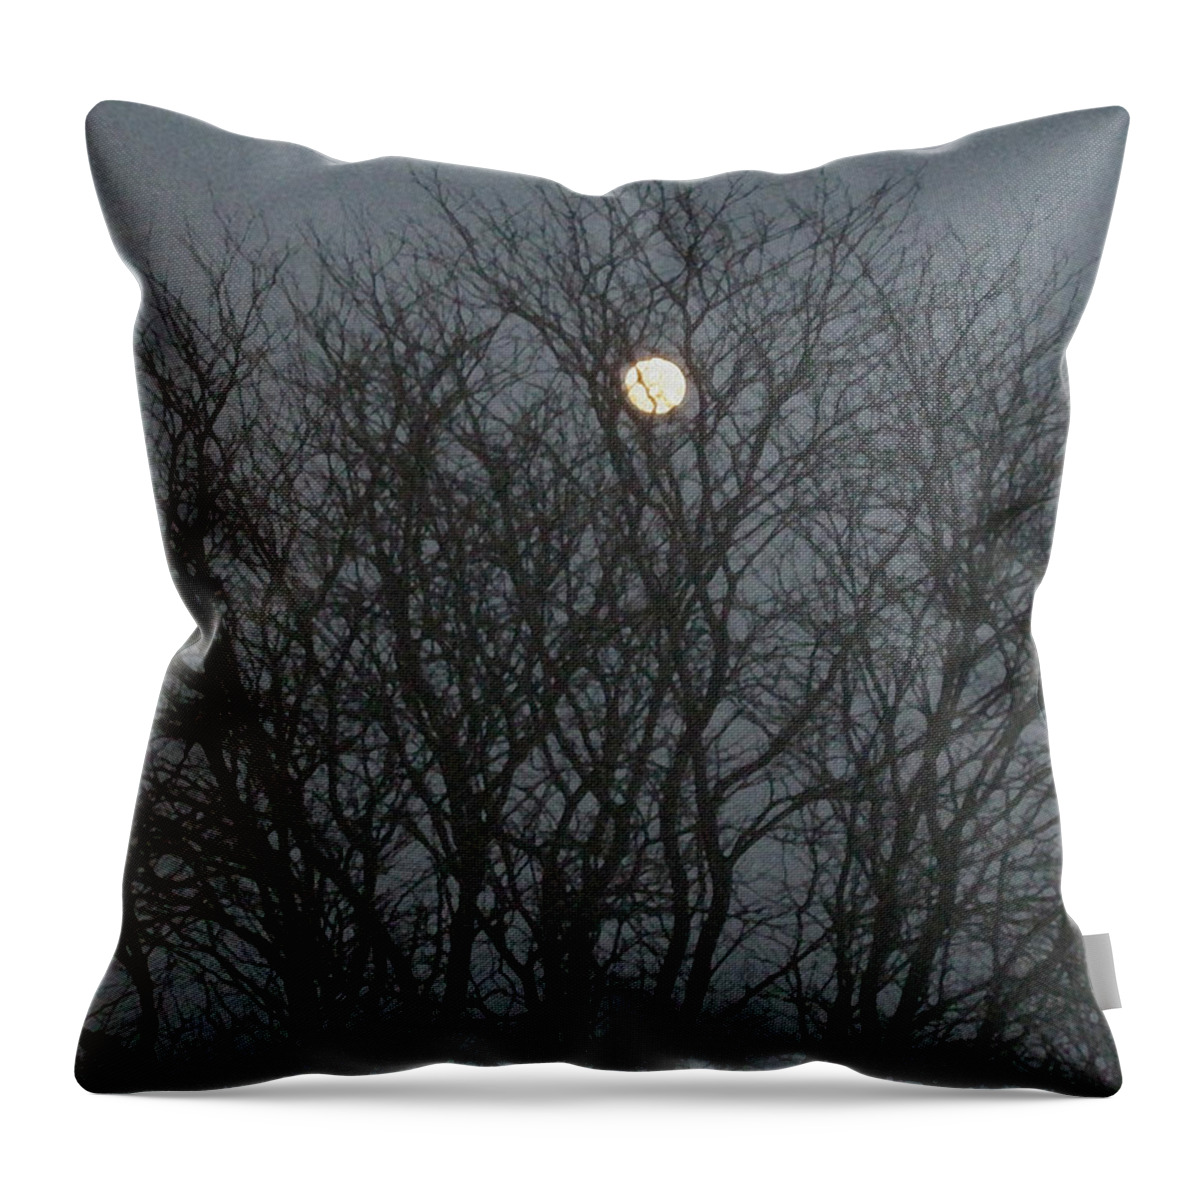 Full Moon Throw Pillow featuring the photograph Beautiful Moon by Sonali Gangane